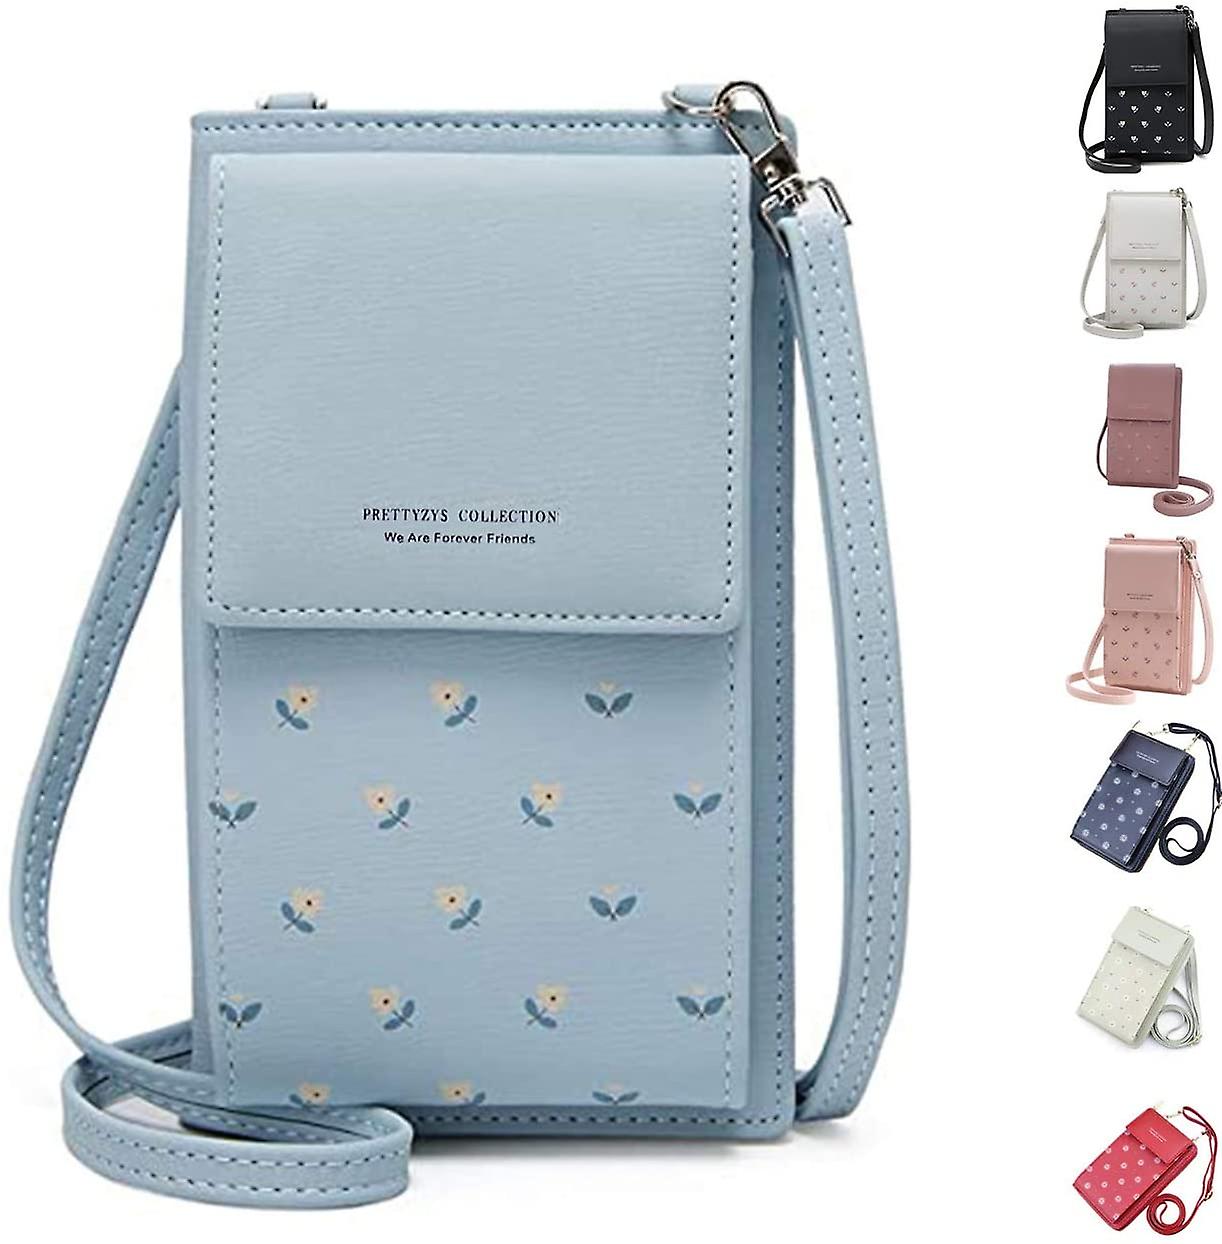 Mobile Phone Bags Are a Fashionable and Practical Accessory